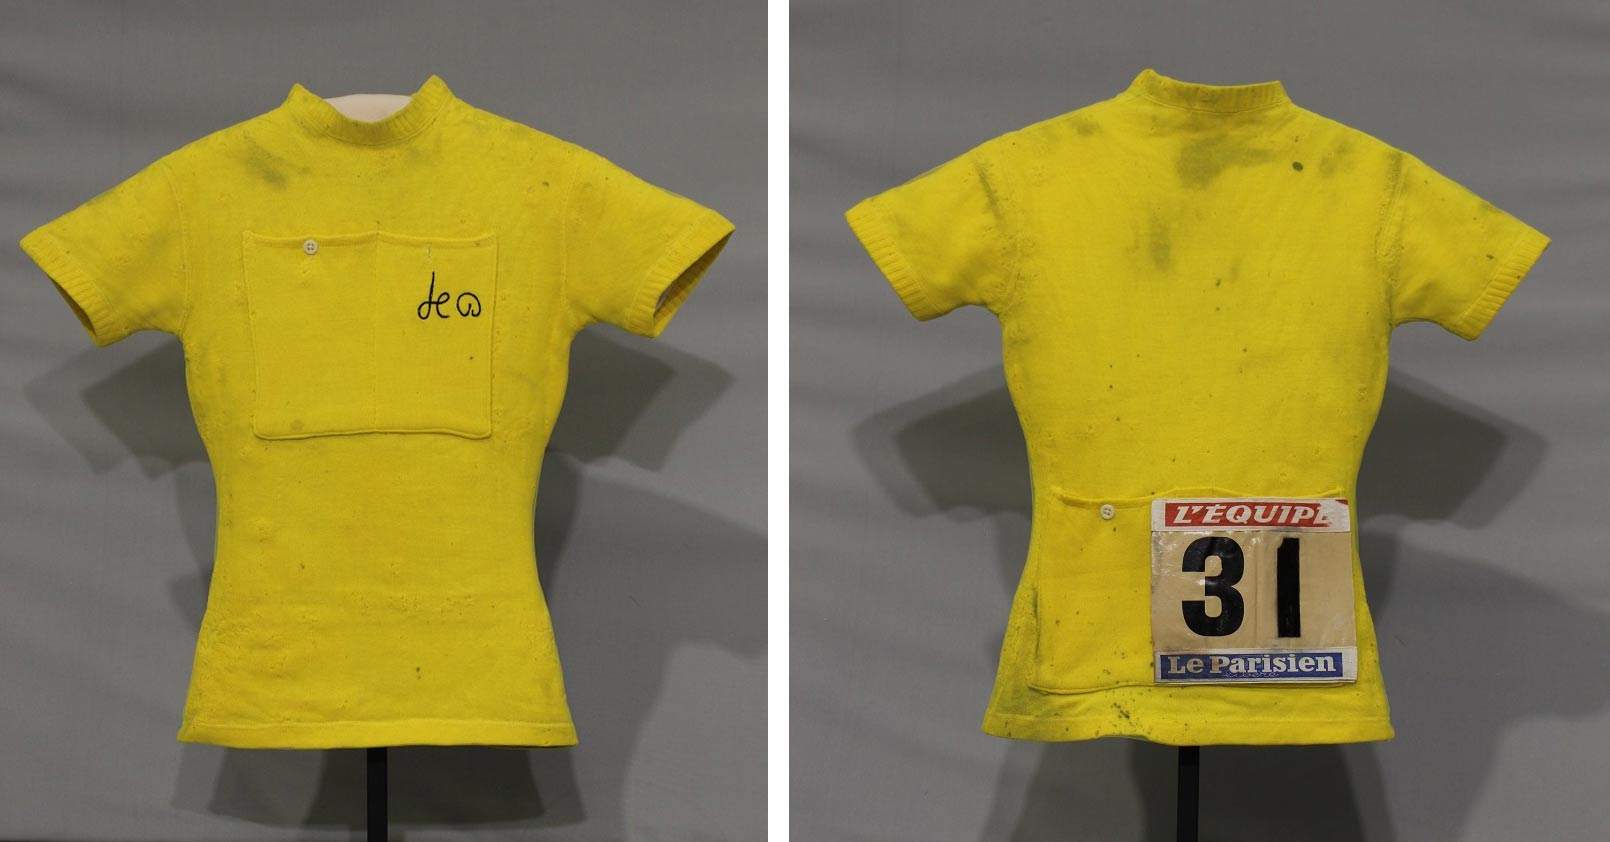 Gino Bartali's historic yellow jersey from the 1948 Tour de France restored